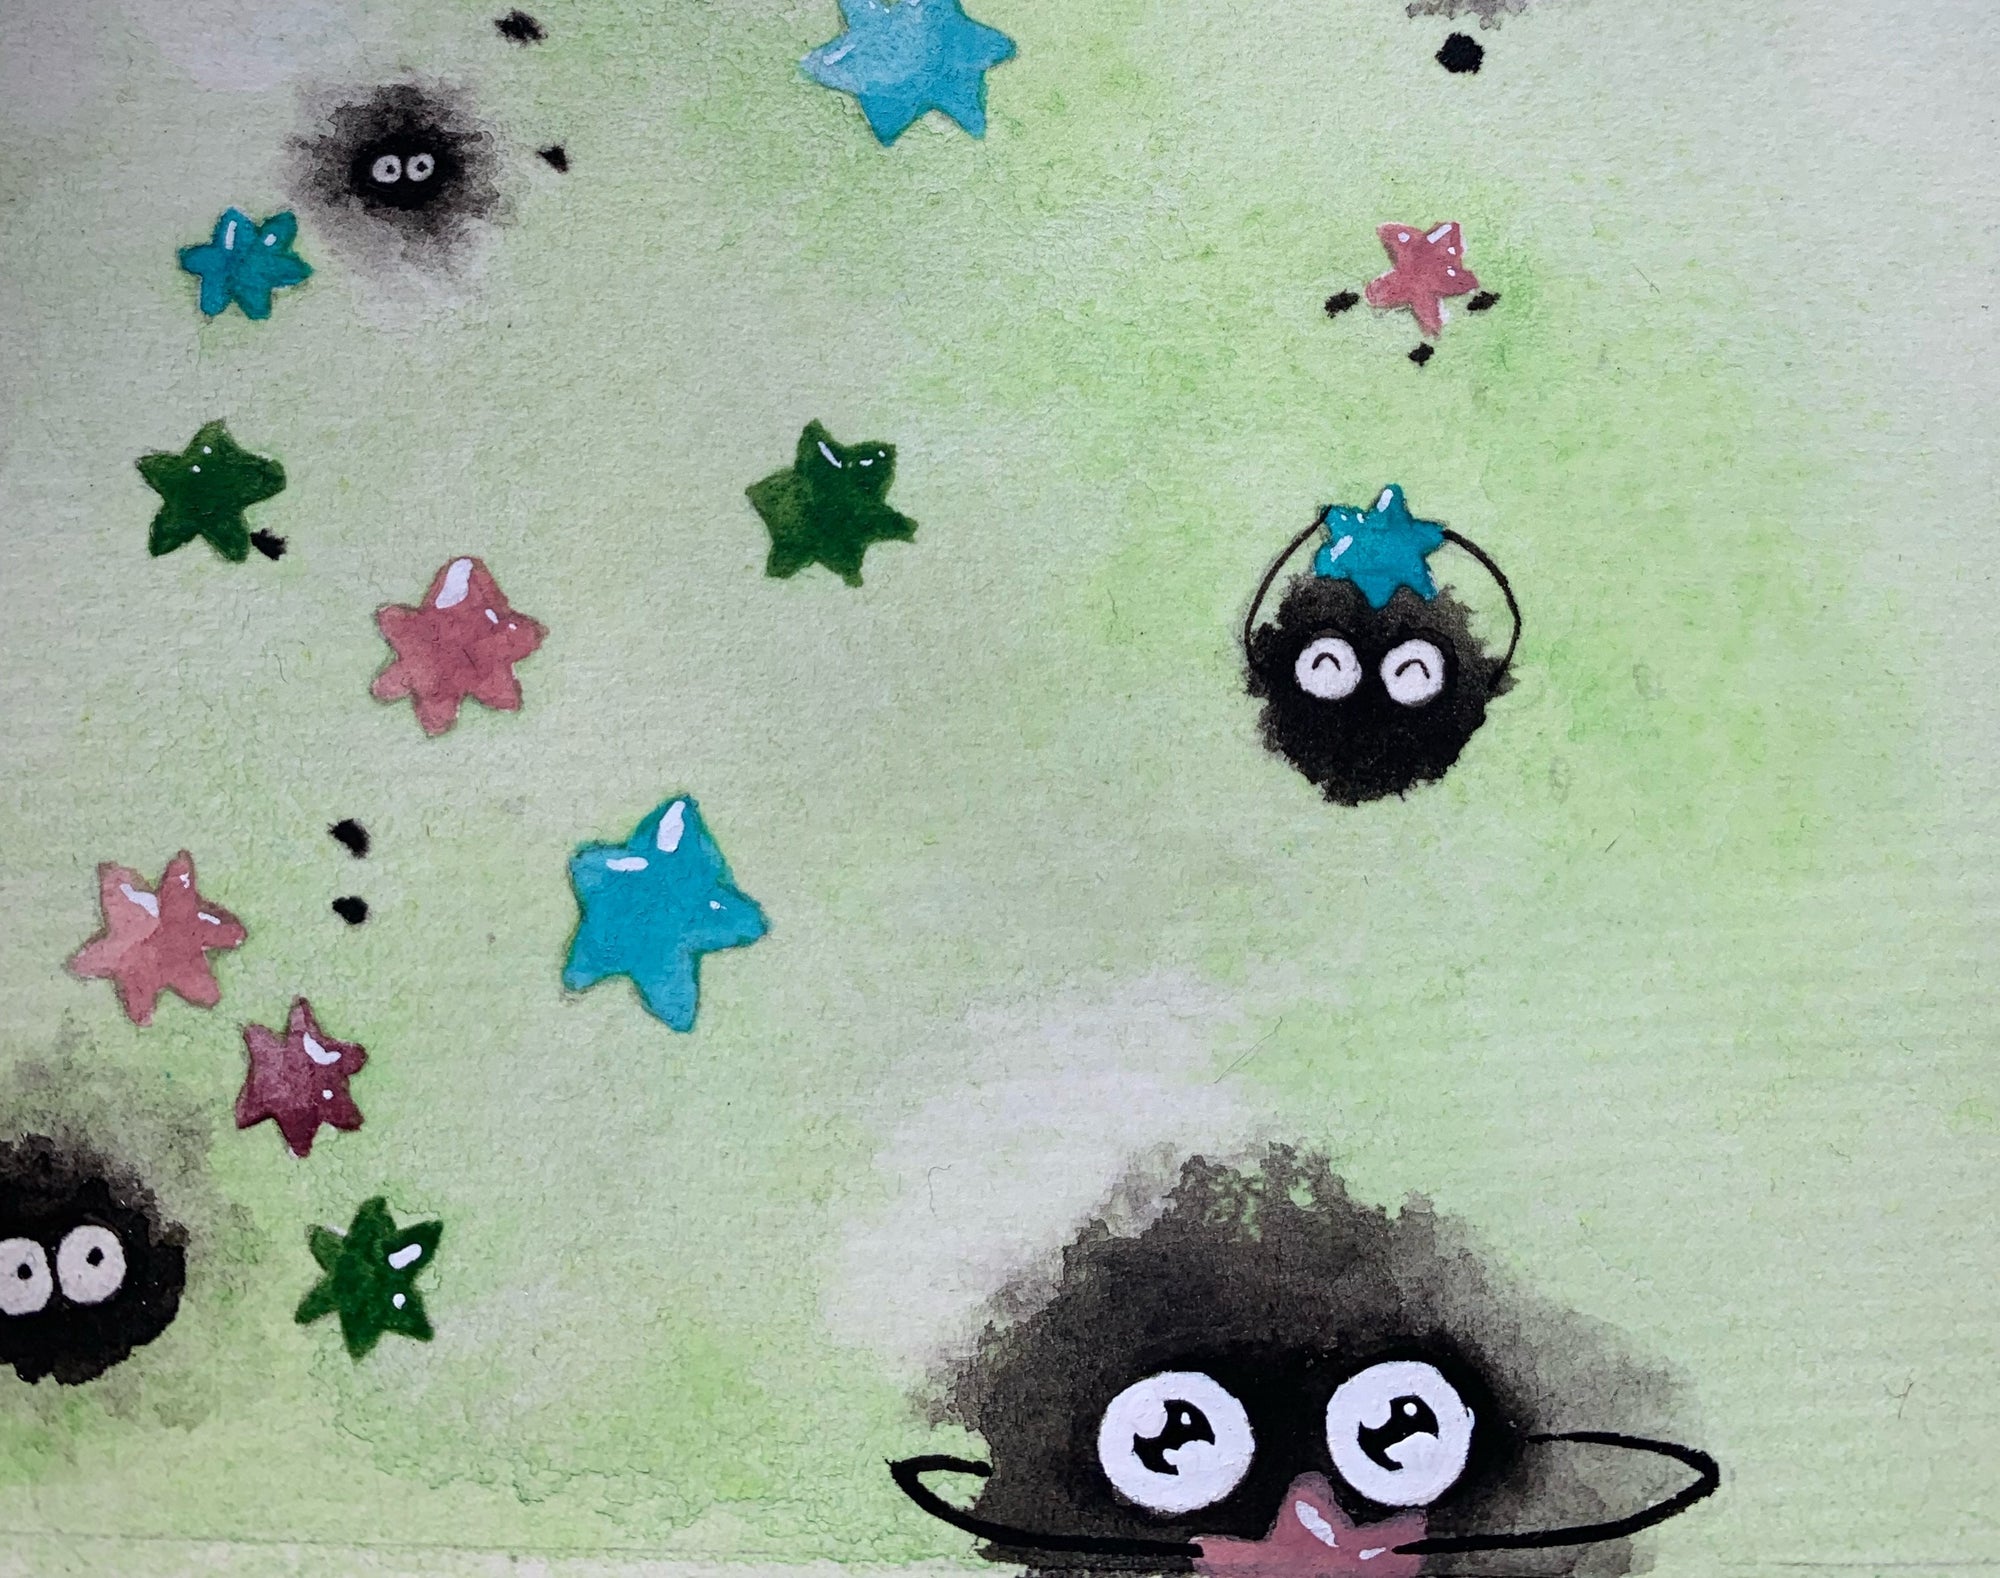 Watercolor painting of dust sprites with little faces holding stars inspired by Ghibli movies